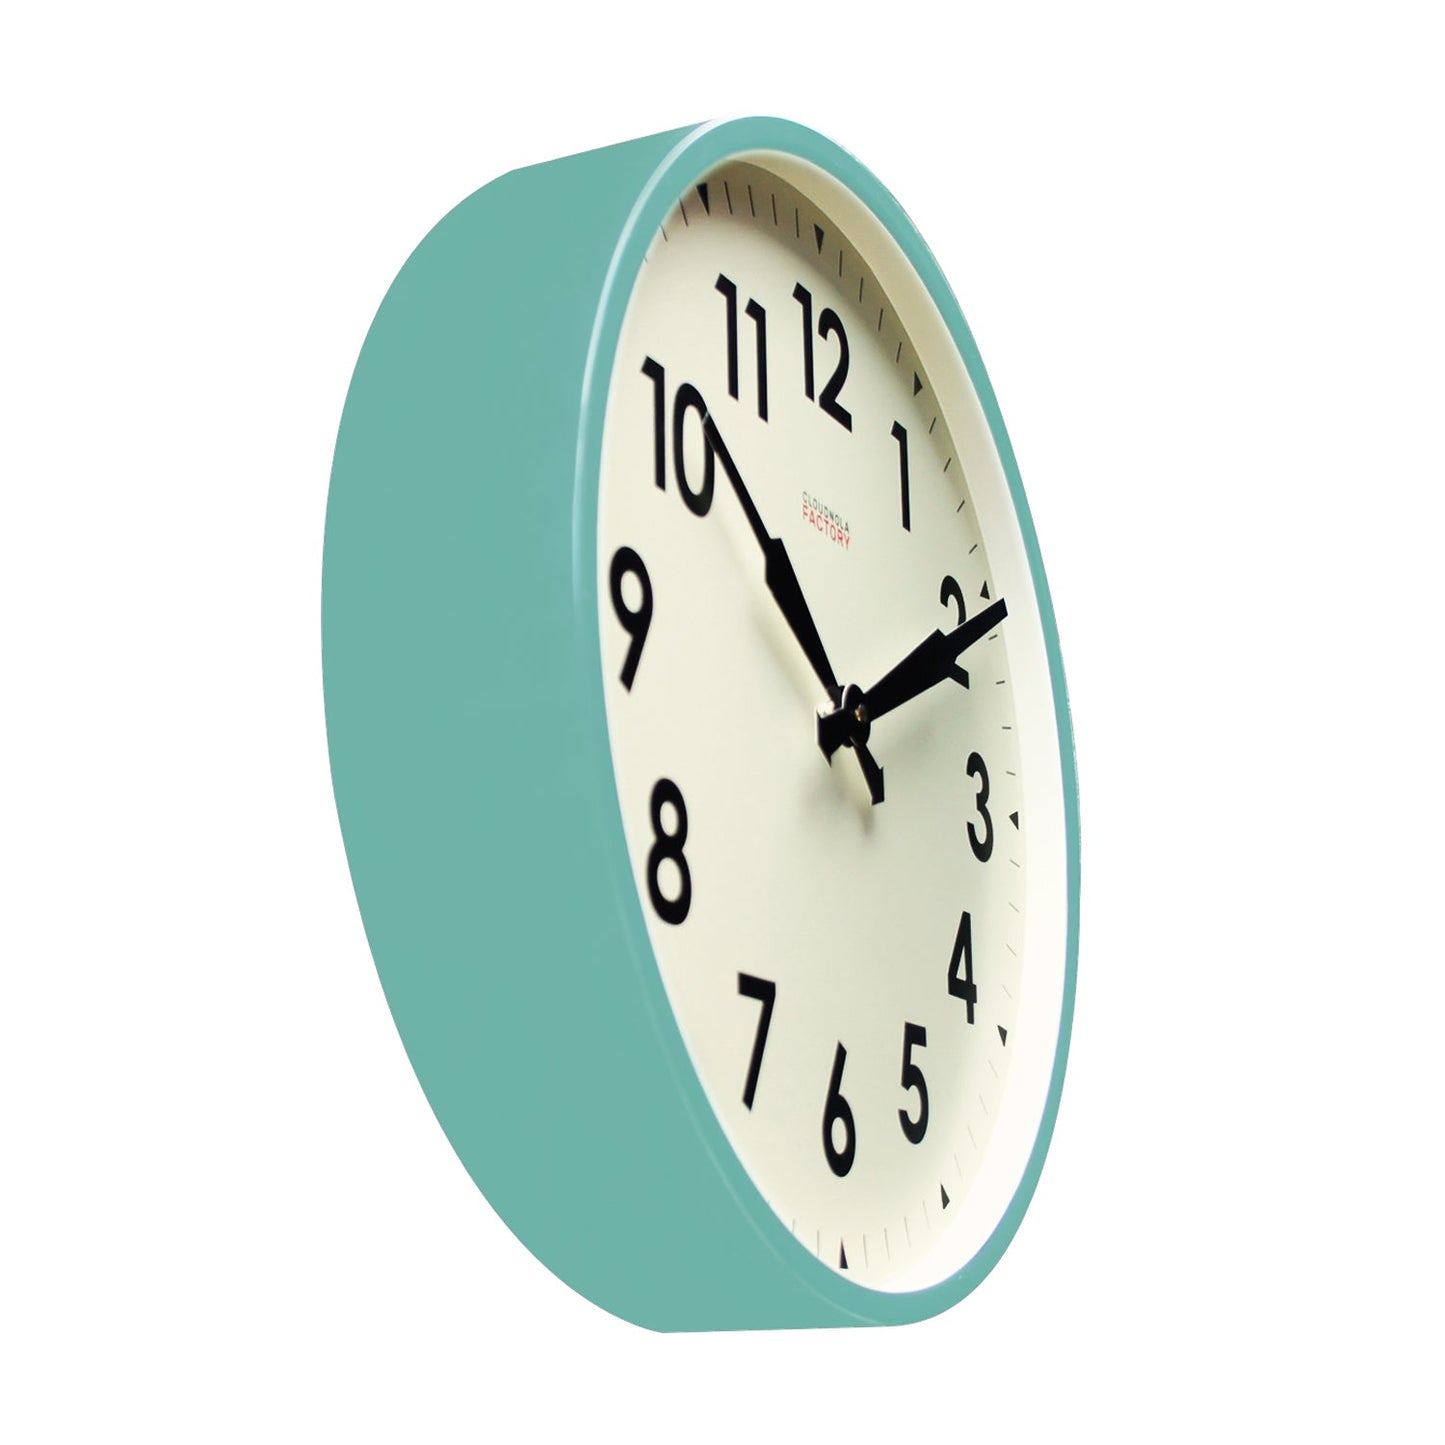 SAMPLE -  Factory XL Turquoise - Diameter 17.7 - Wall Clock - Silent - Steel Case